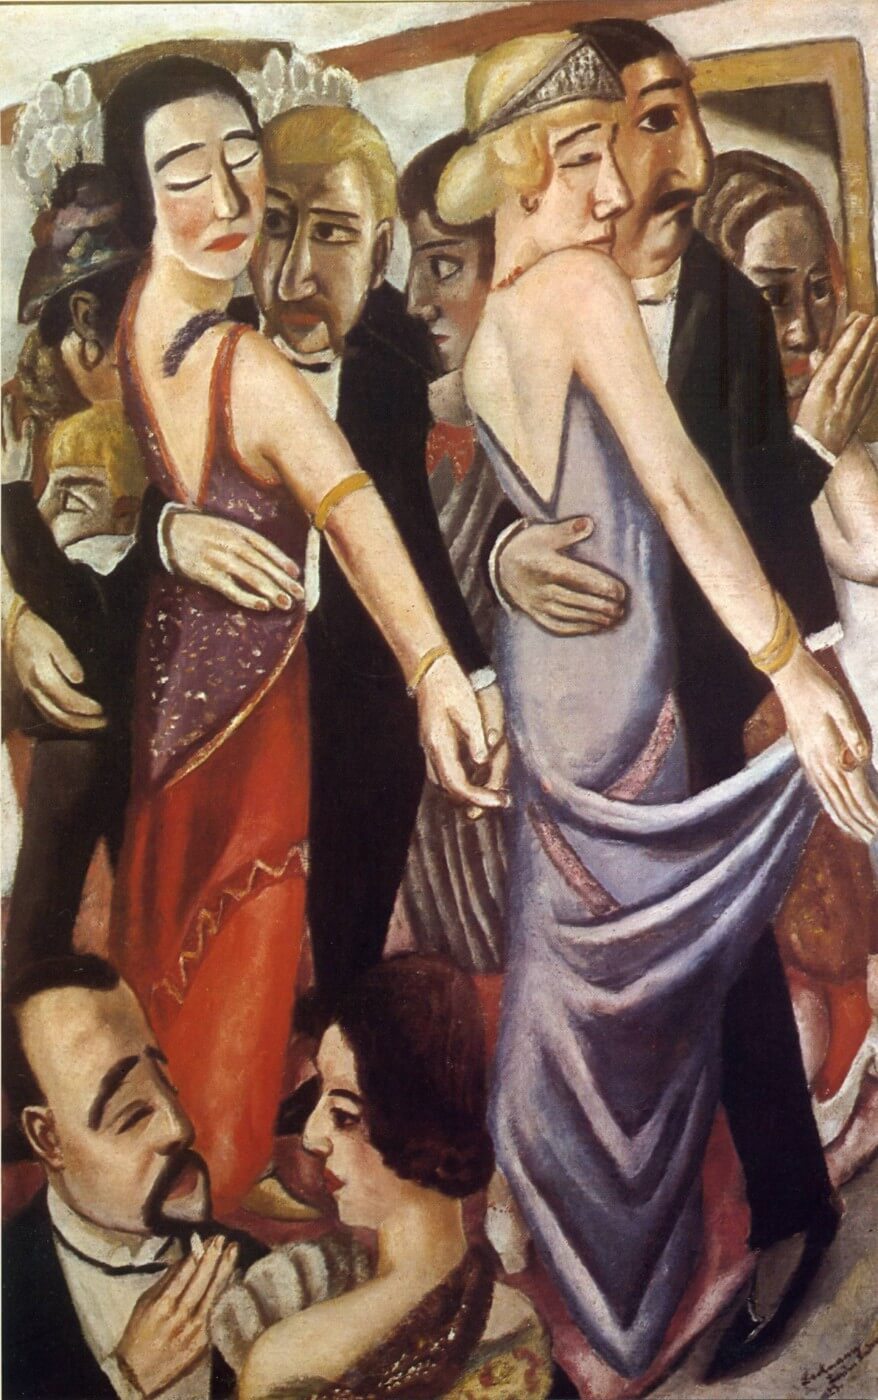 Dance Club Baden-Baden ( 1923 ) - Max Beckmann - Posters by Max Beckmann | Buy Posters, Frames, Canvas & Digital Art | Small, Compact, Medium and Large Variants